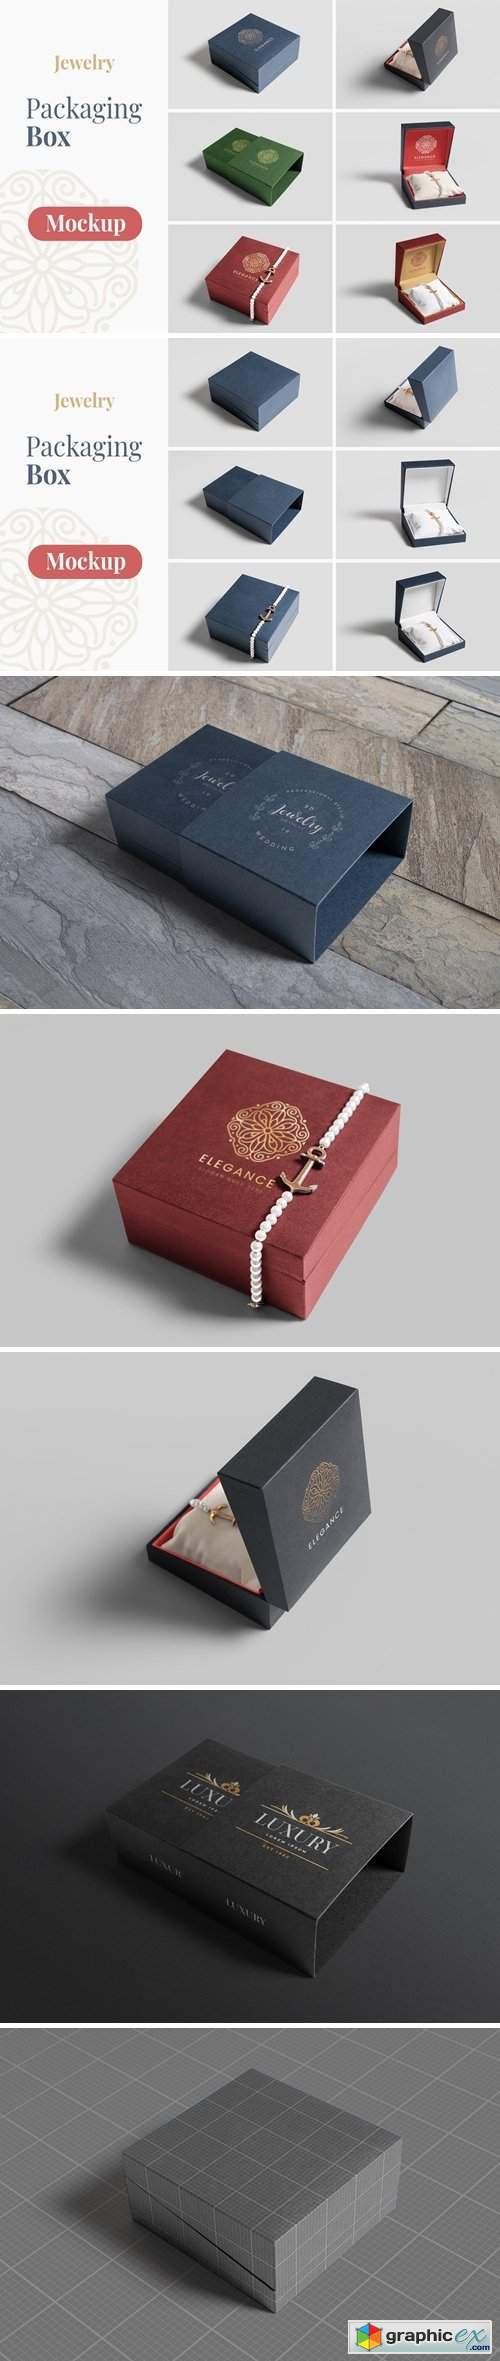 Jewelry Packaging Box Mockups